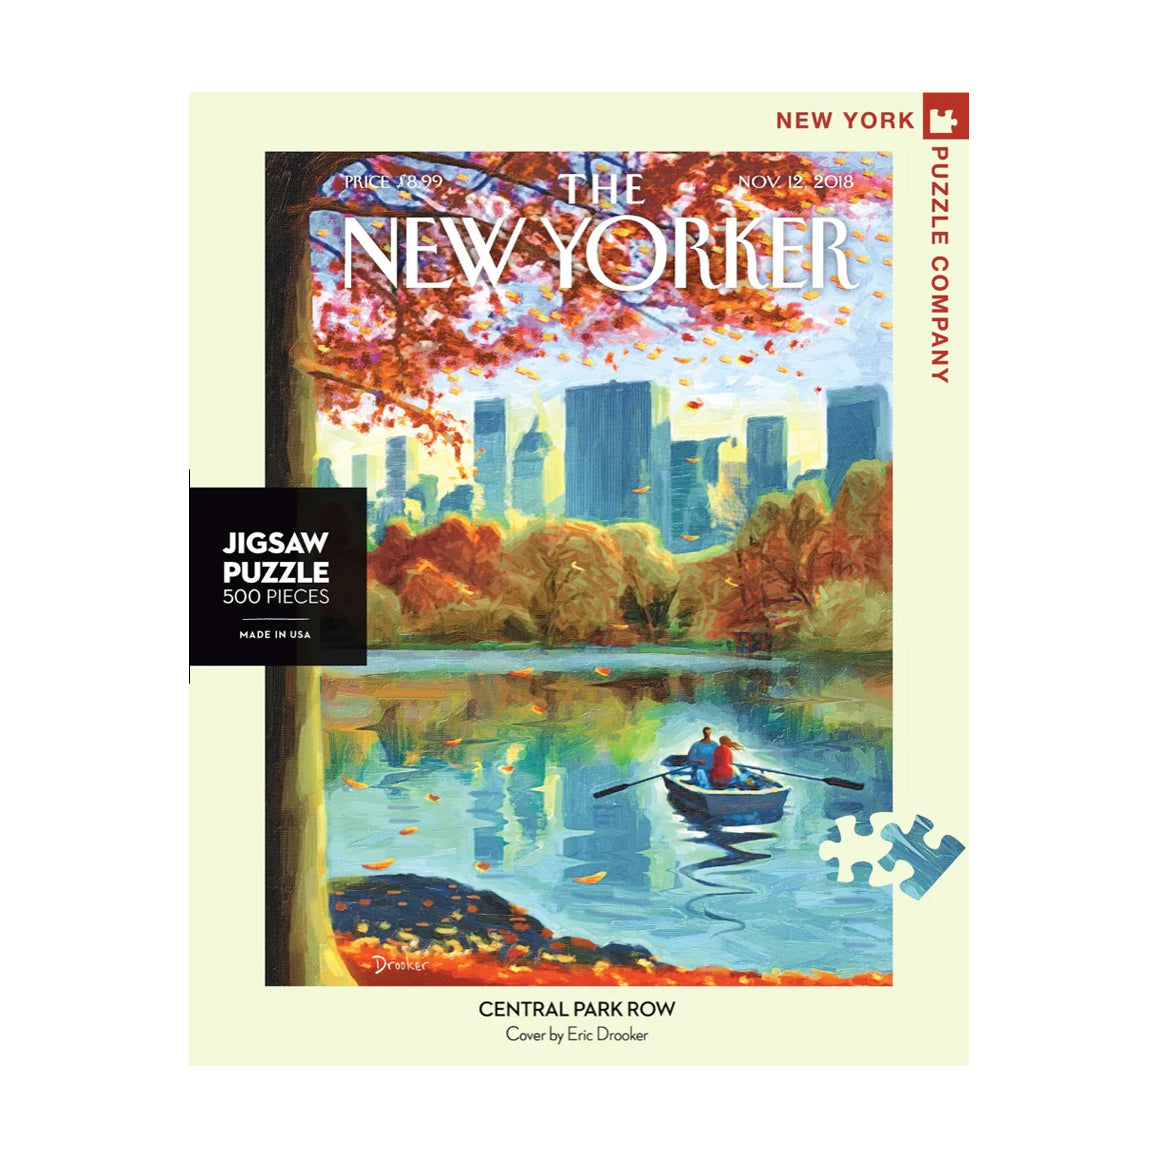 Puzzel Central Park Row│New York Puzzle Company│the New Yorker│art. NPZNY1950│verpakking voorkant